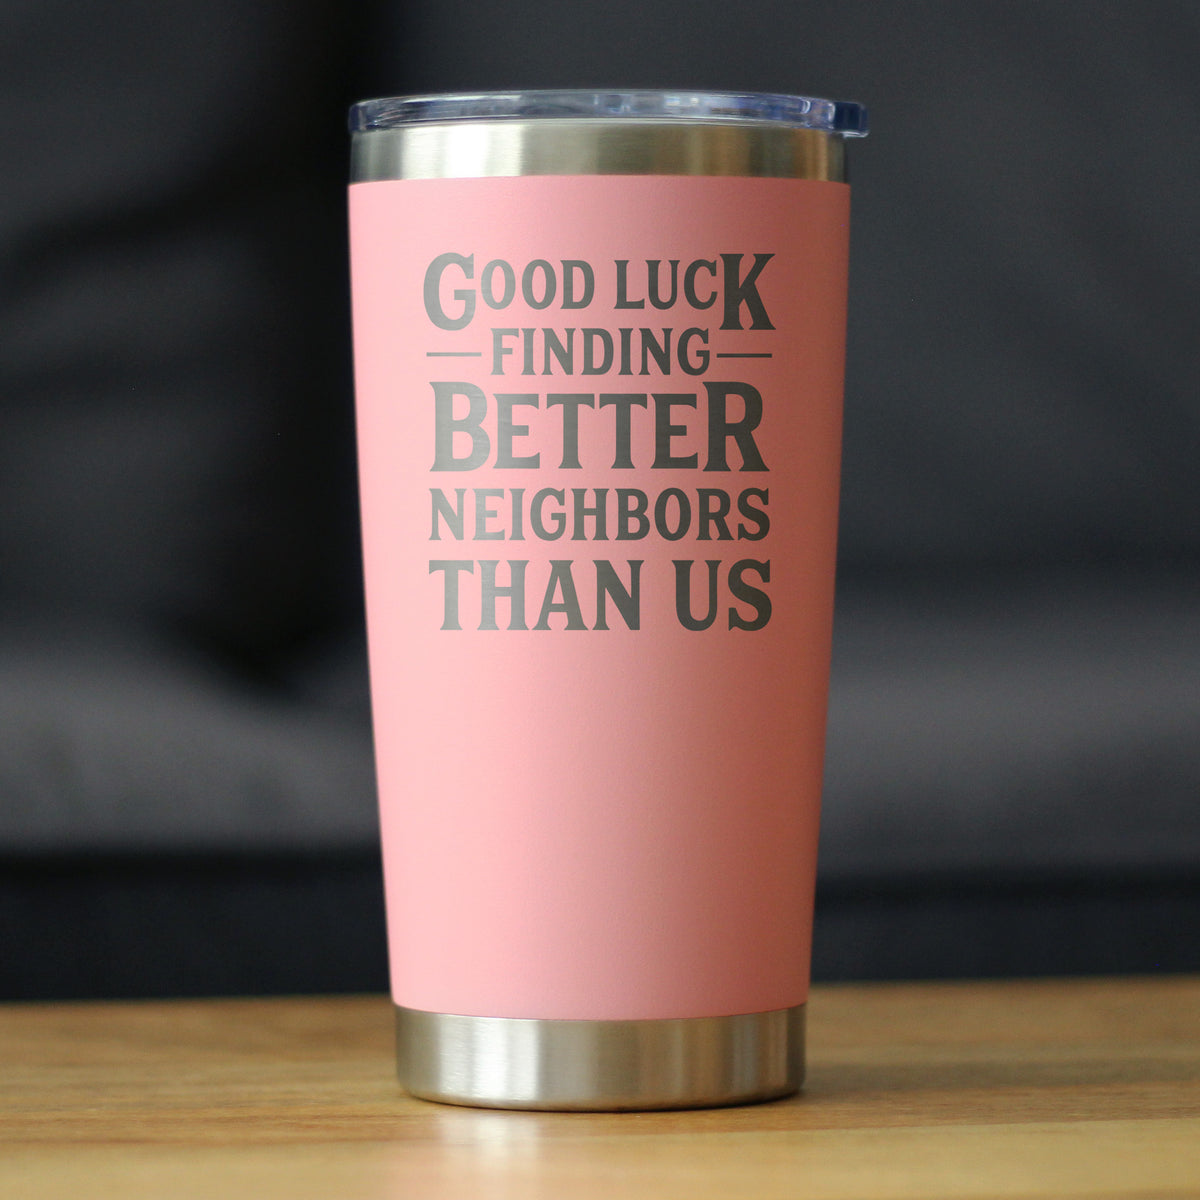 Good Luck Finding Better Neighbors Than Us - Insulated Coffee Tumbler Cup with Sliding Lid - Stainless Steel Insulated Mug - Funny Moving Away Gifts for Neighbor